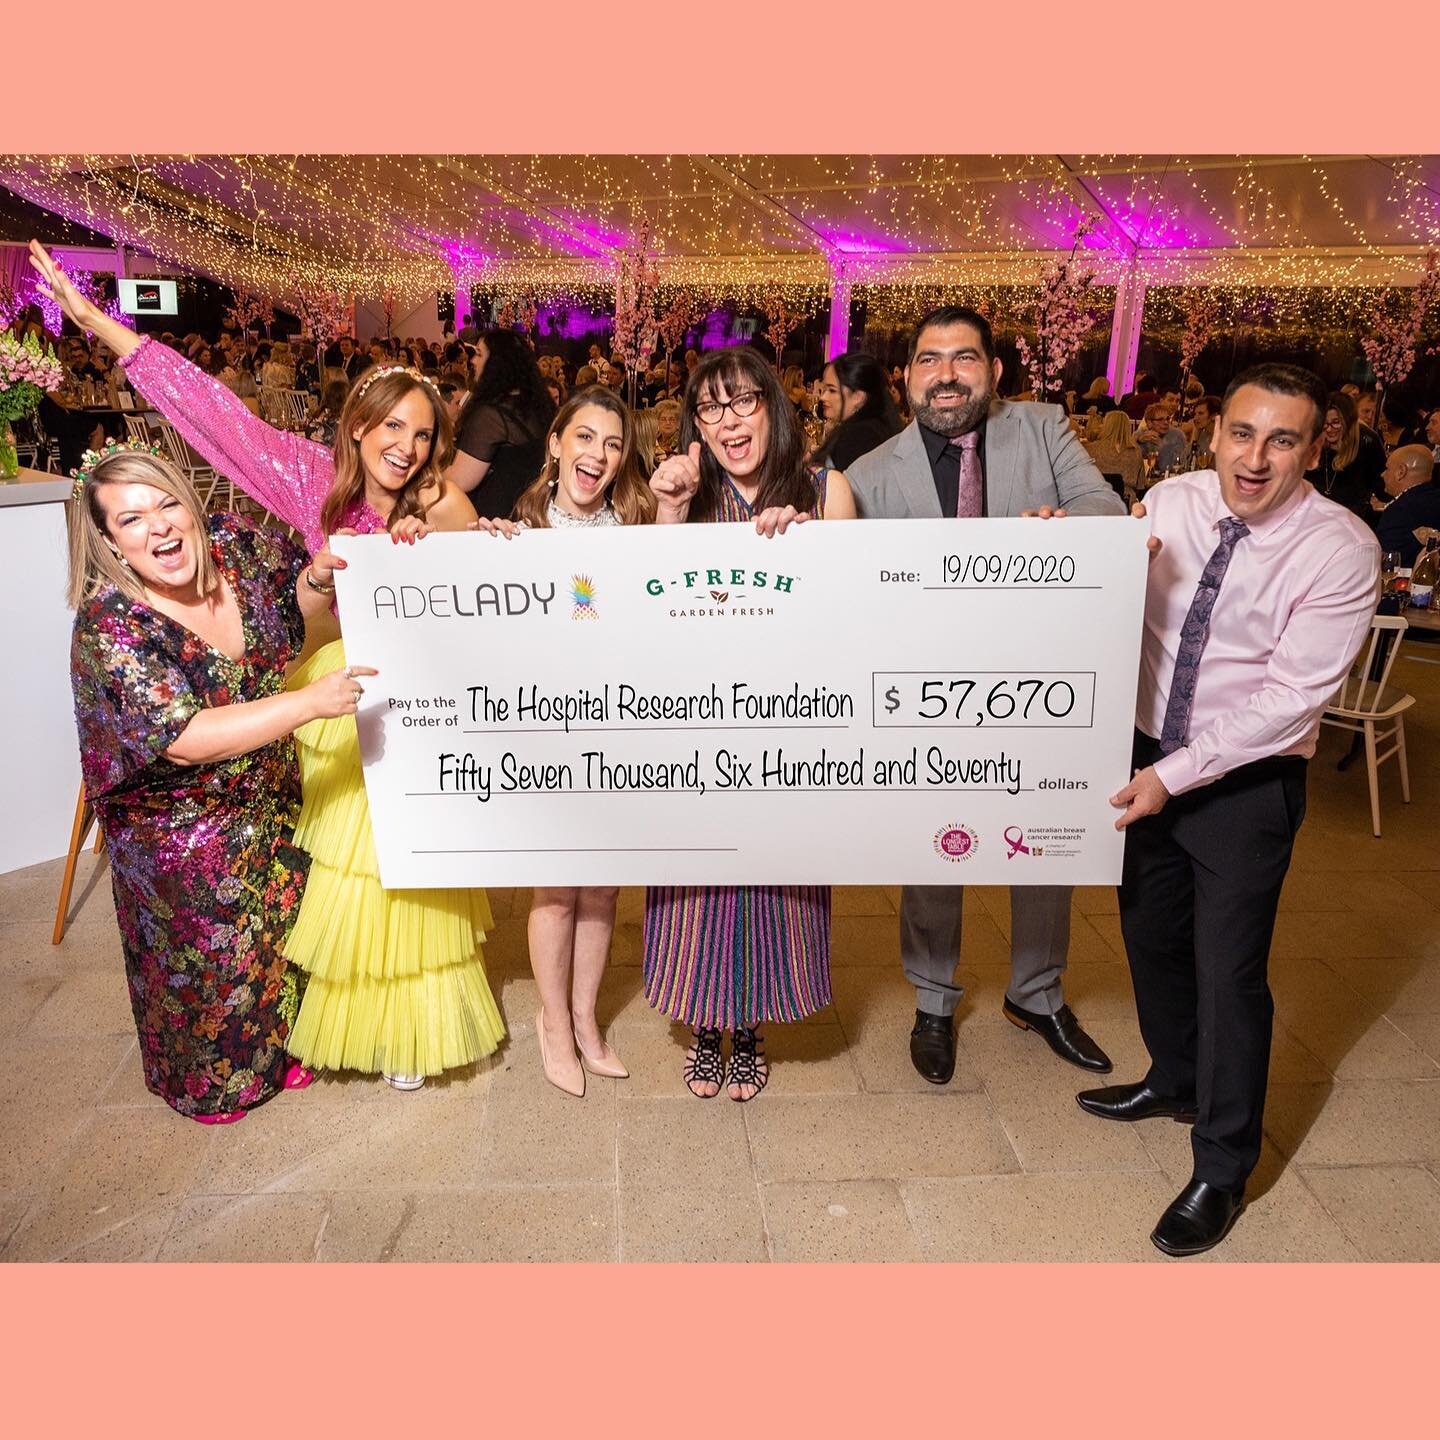 What a result! Over $57,000 raised last night at the @_adelady @thelongesttable event at the wonderful @sunnybrae_estate ⠀
⠀
#together fight⠀
#adelady ⠀
#thelongesttable ⠀
#tlt2020⠀
#cancercharity ⠀
#breastcancerresearch ⠀
#eventphotography ⠀
@gfresh